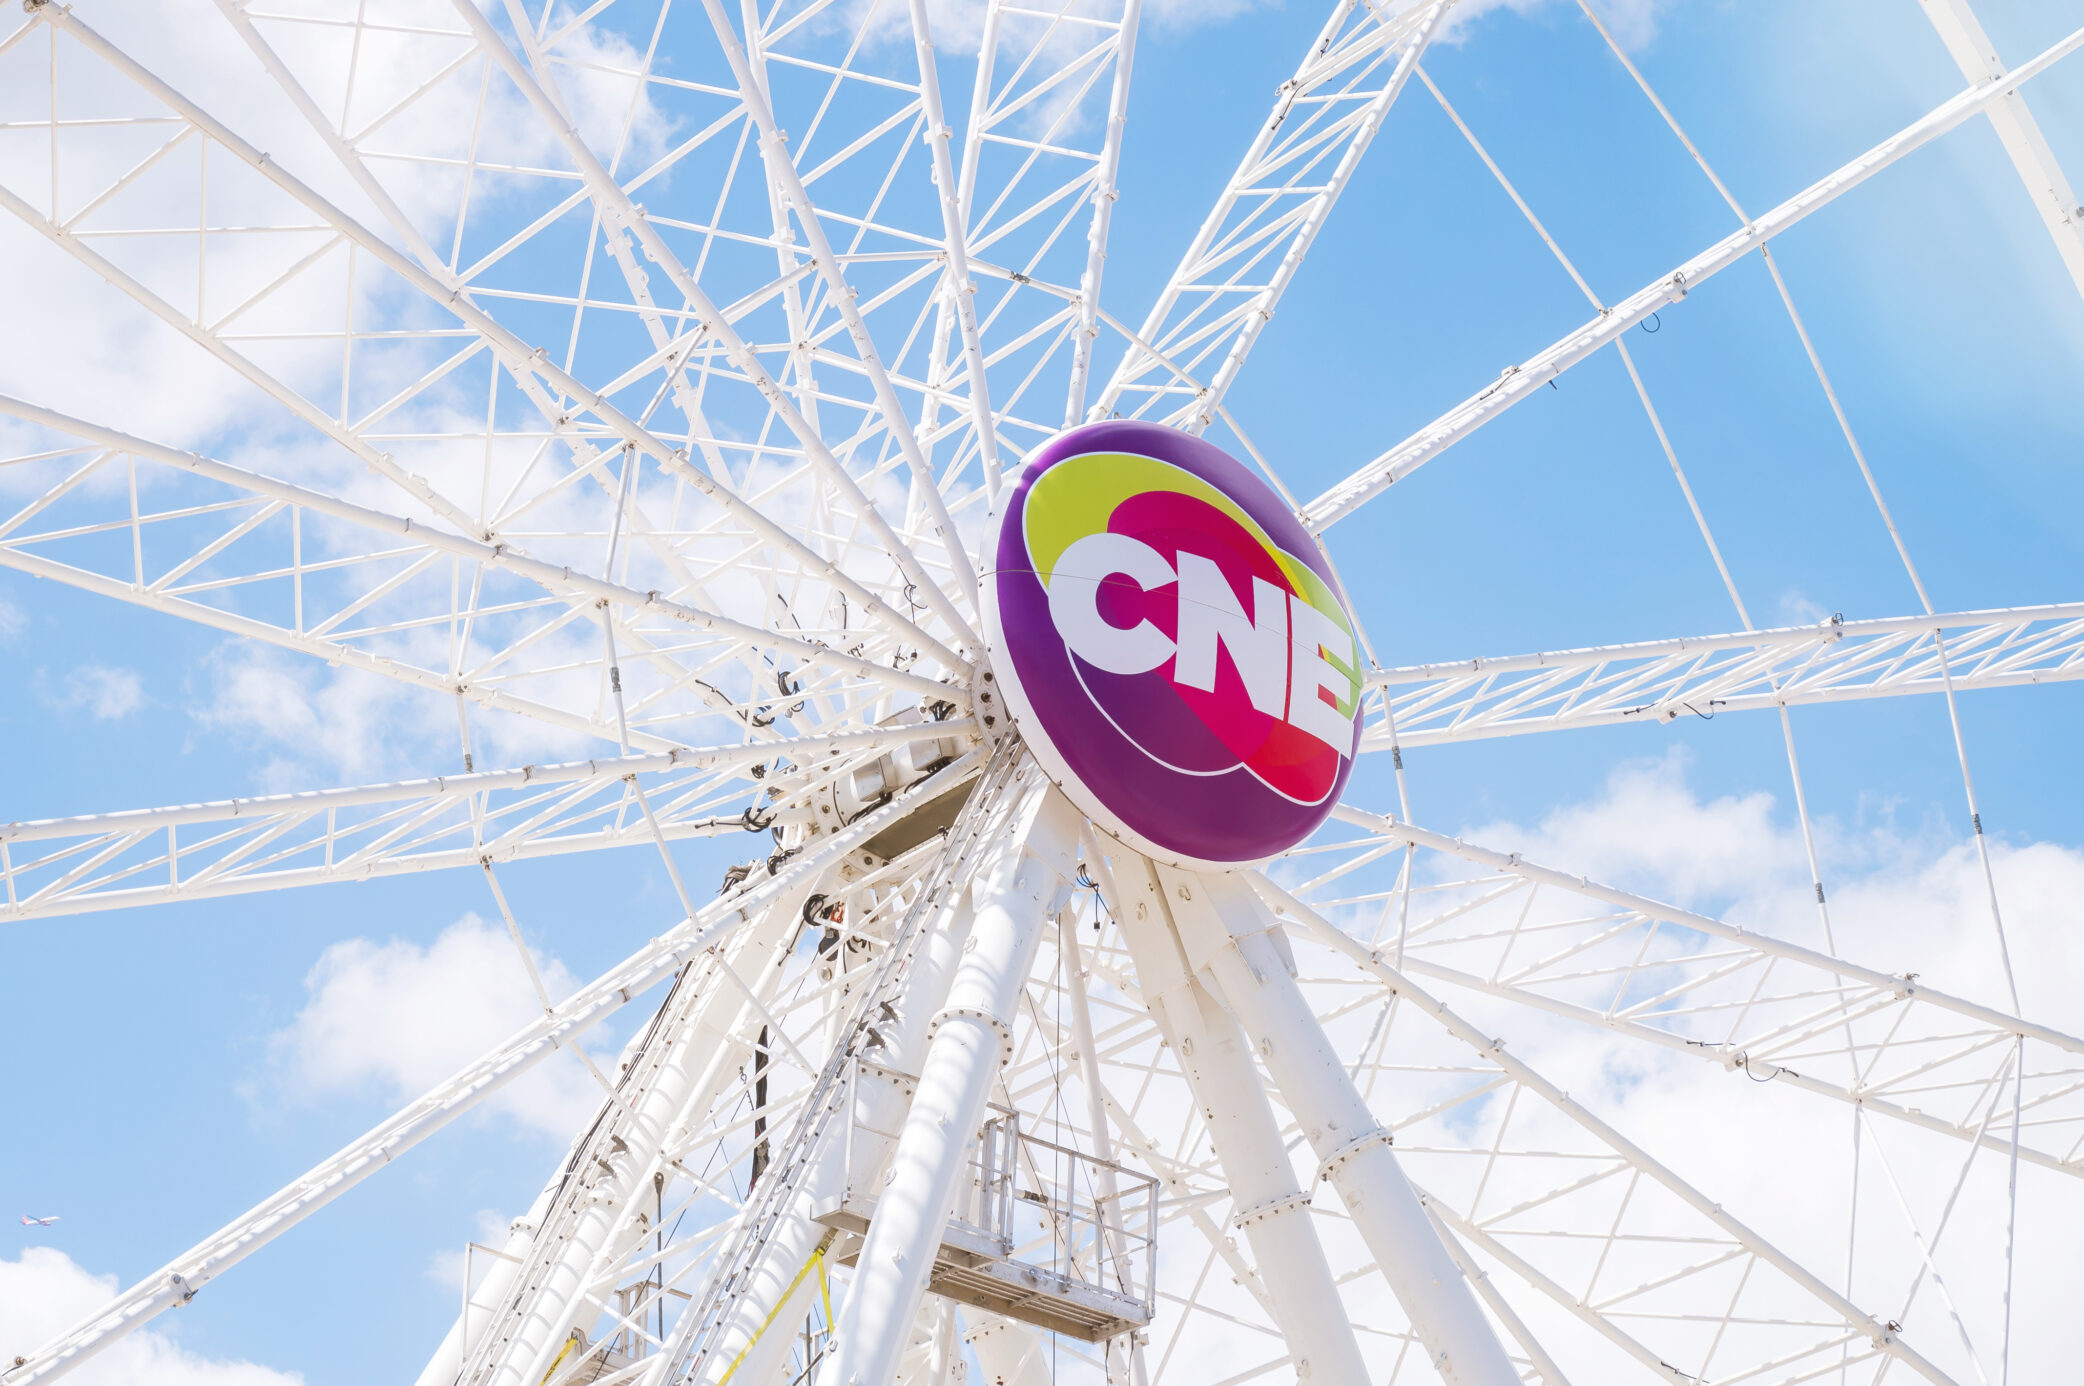 Image of the CNE logo on the middle of the Ferris Wheel